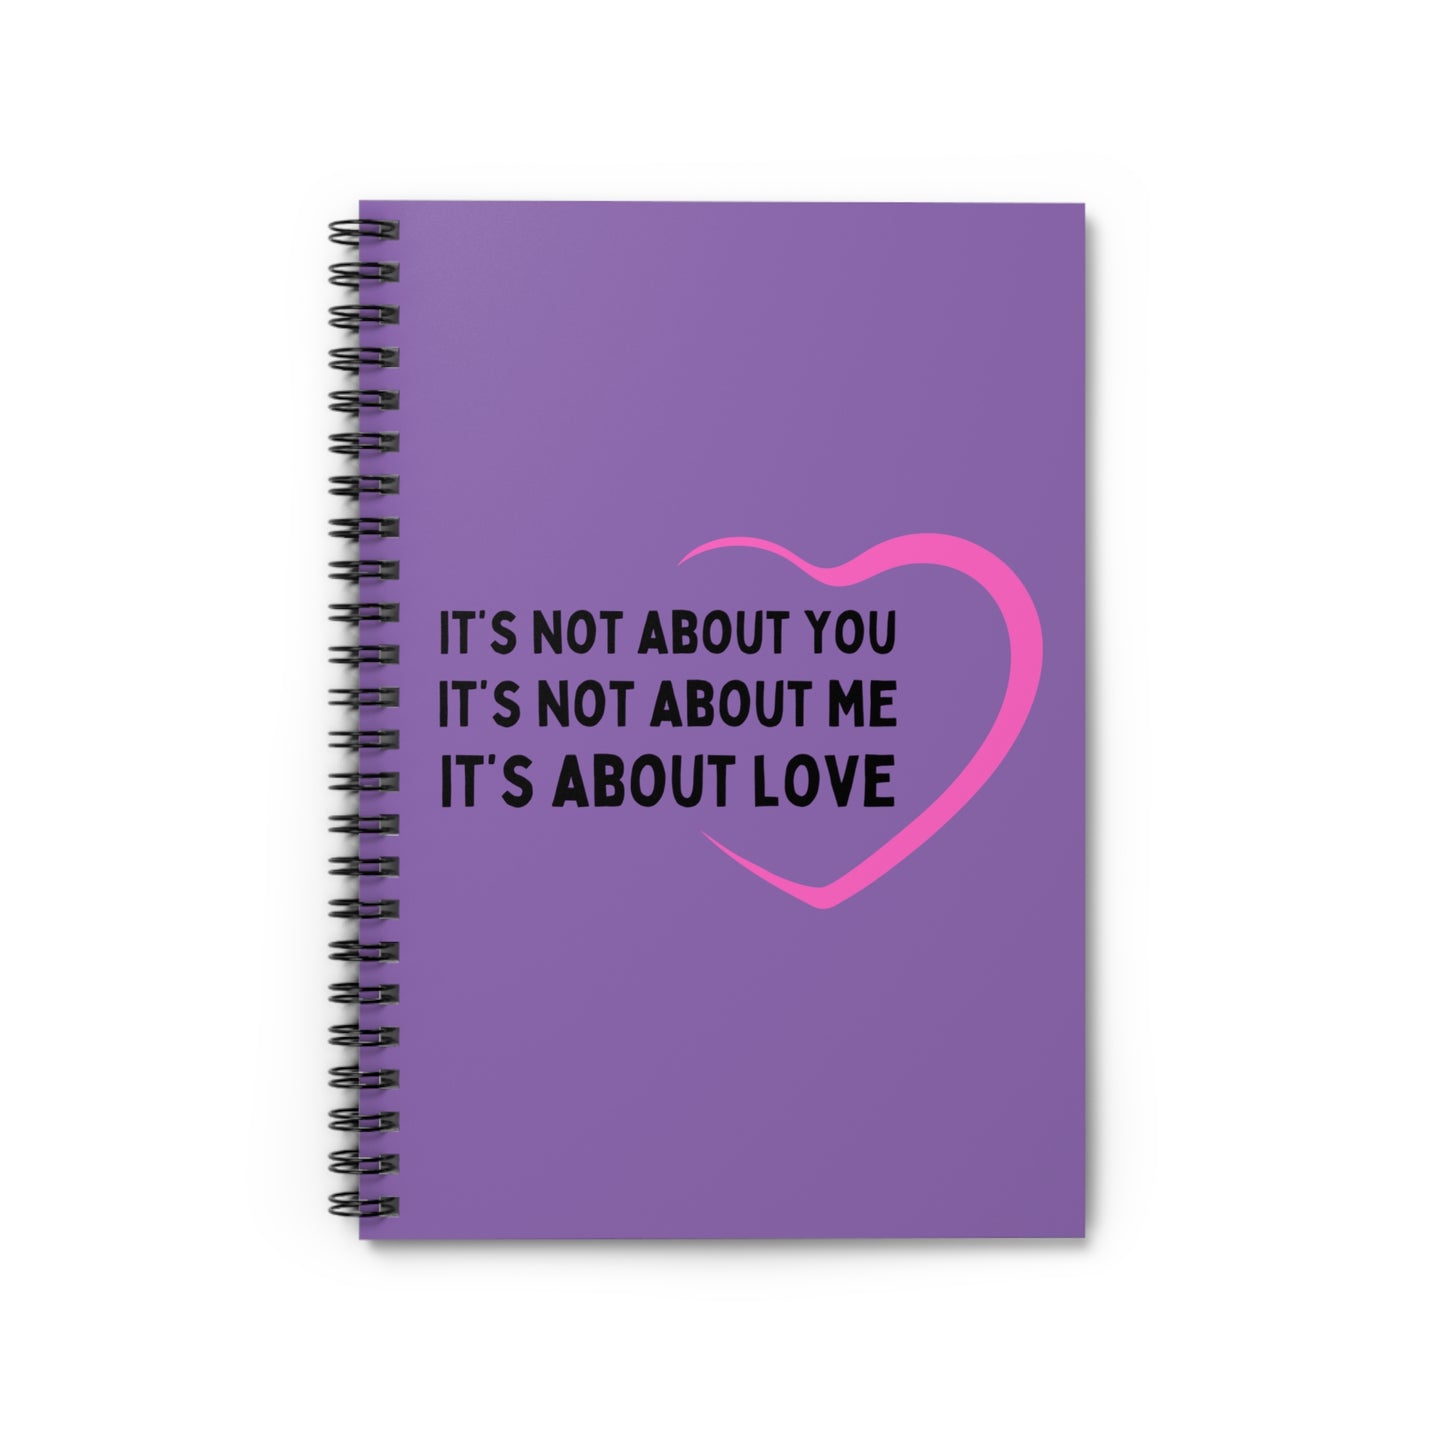 It's About Love | Spiral Notebook - Ruled Line